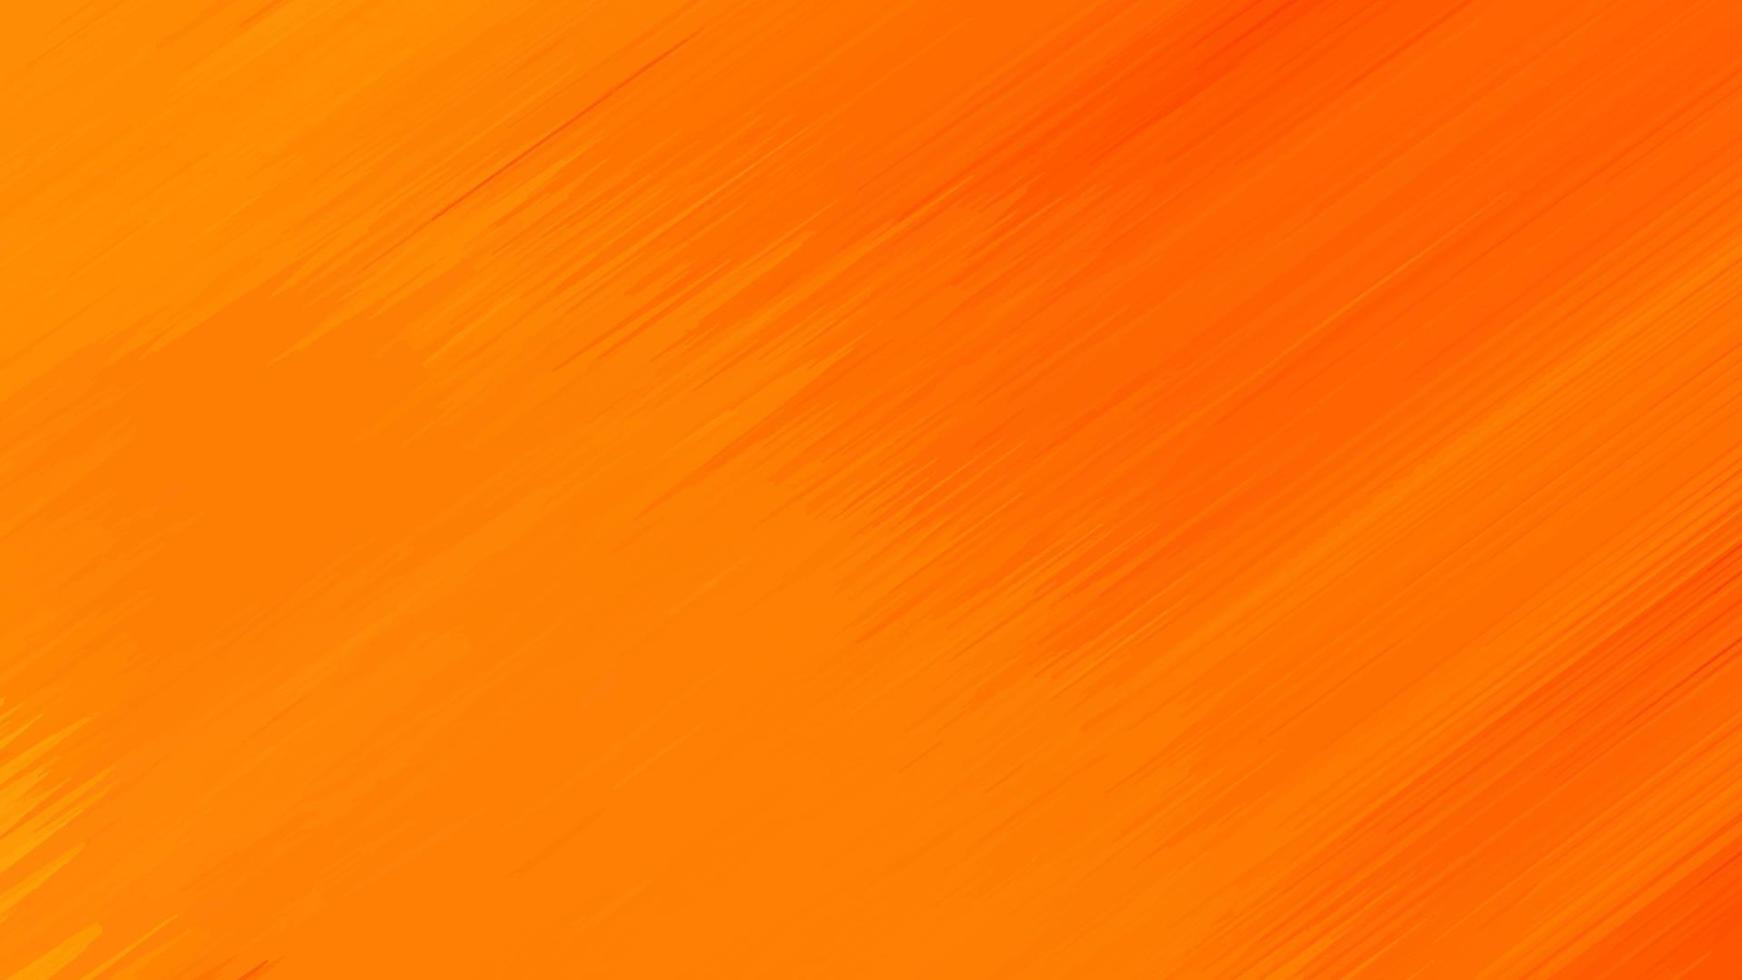 Orange Modern Abstract Background. Modern Orange Abstract Design concept of web page design. Easy to edit. Vector illustration